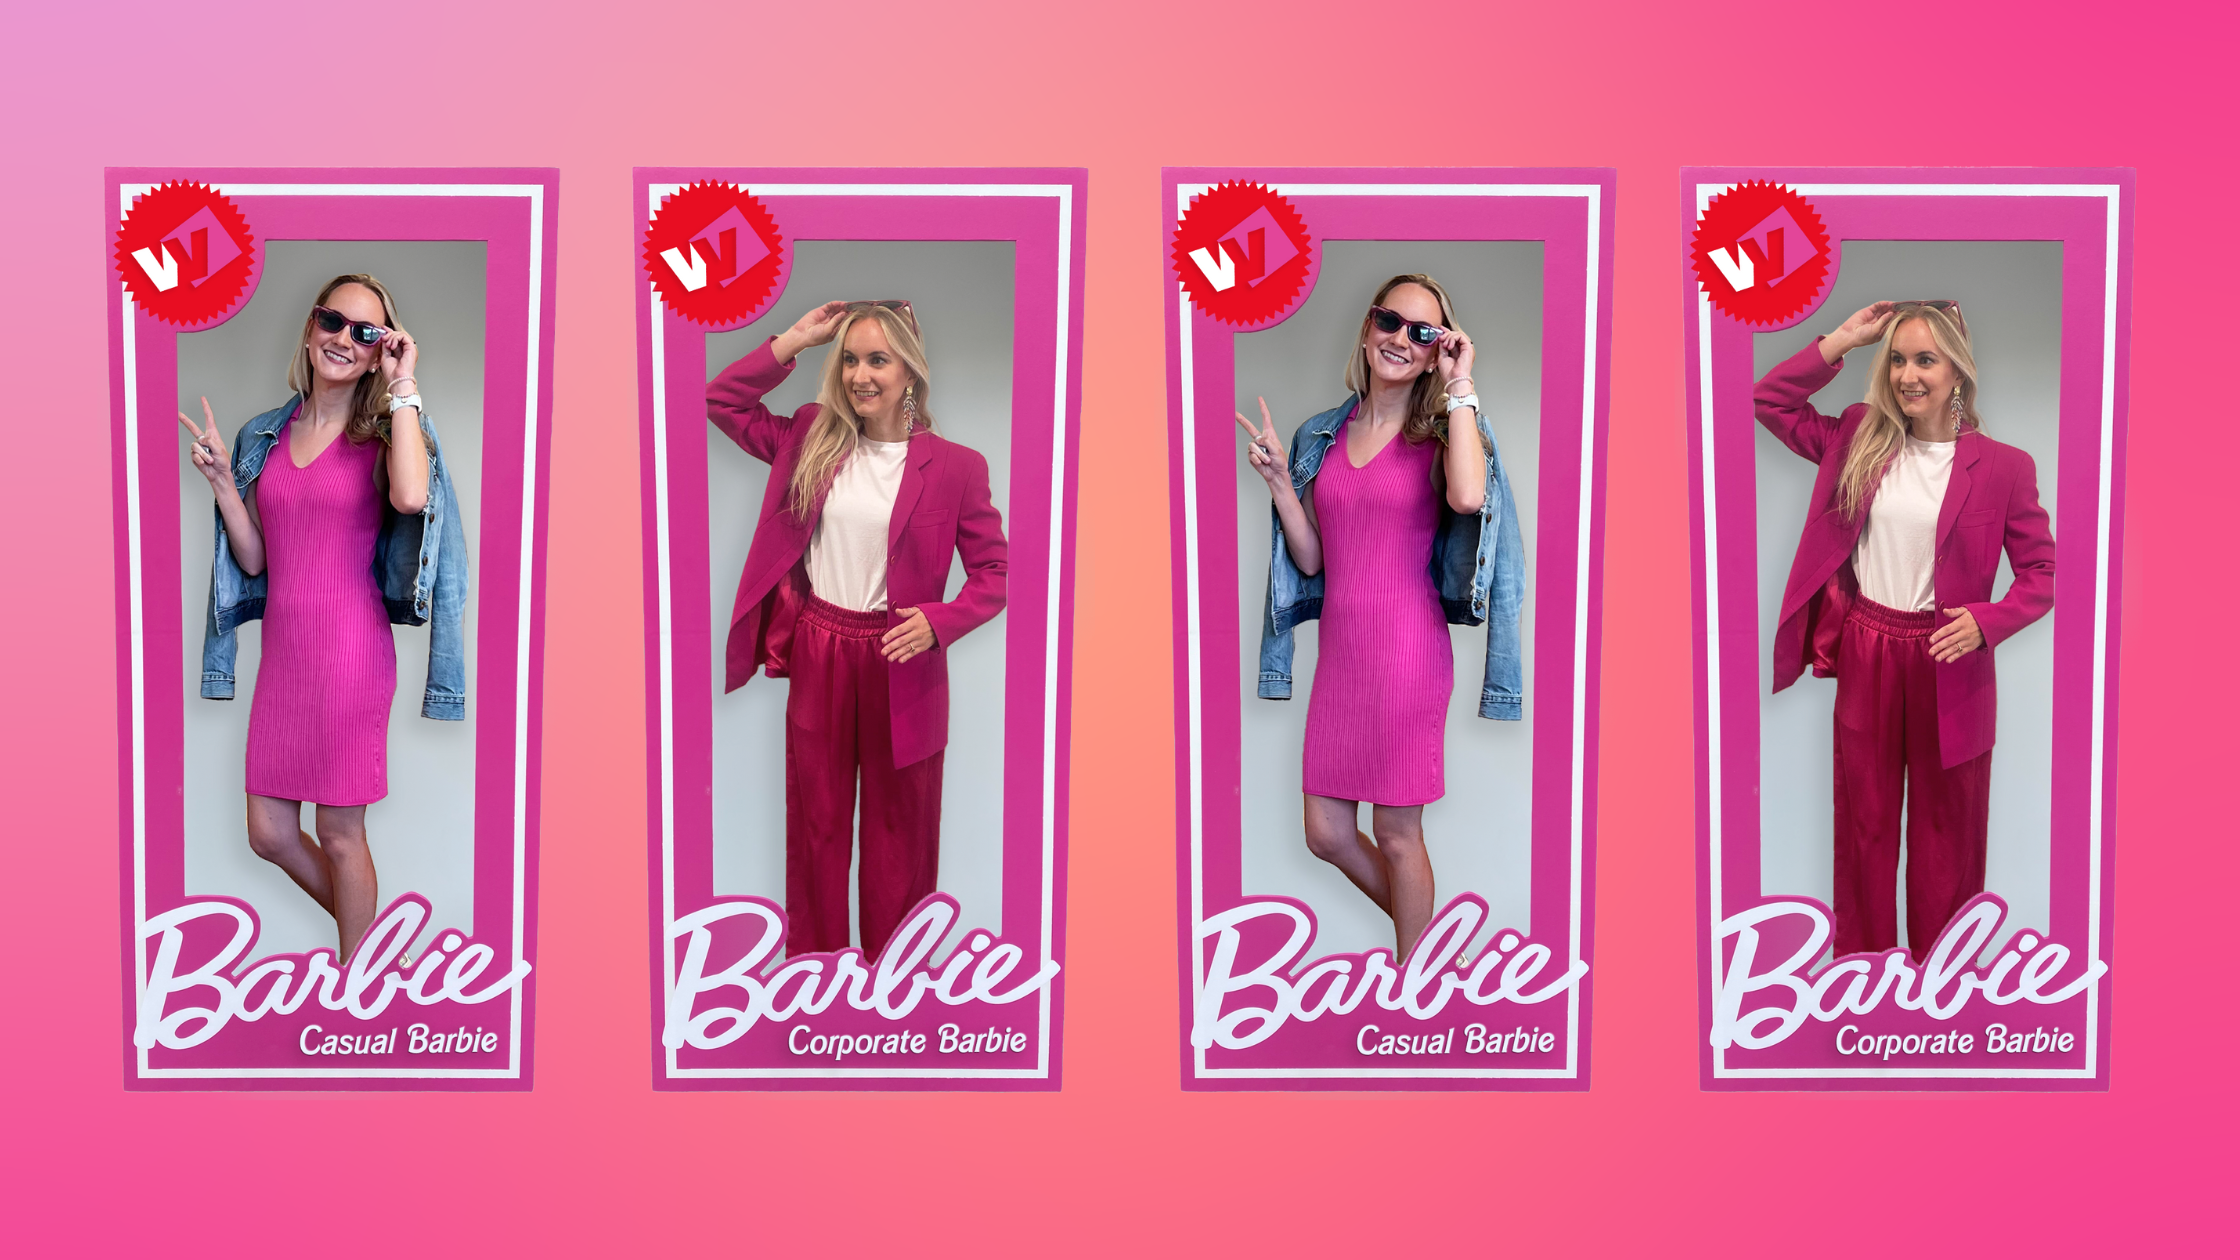 Image of Barbie for the Barbenheimer Blog Post about Digital Marketing Lessons